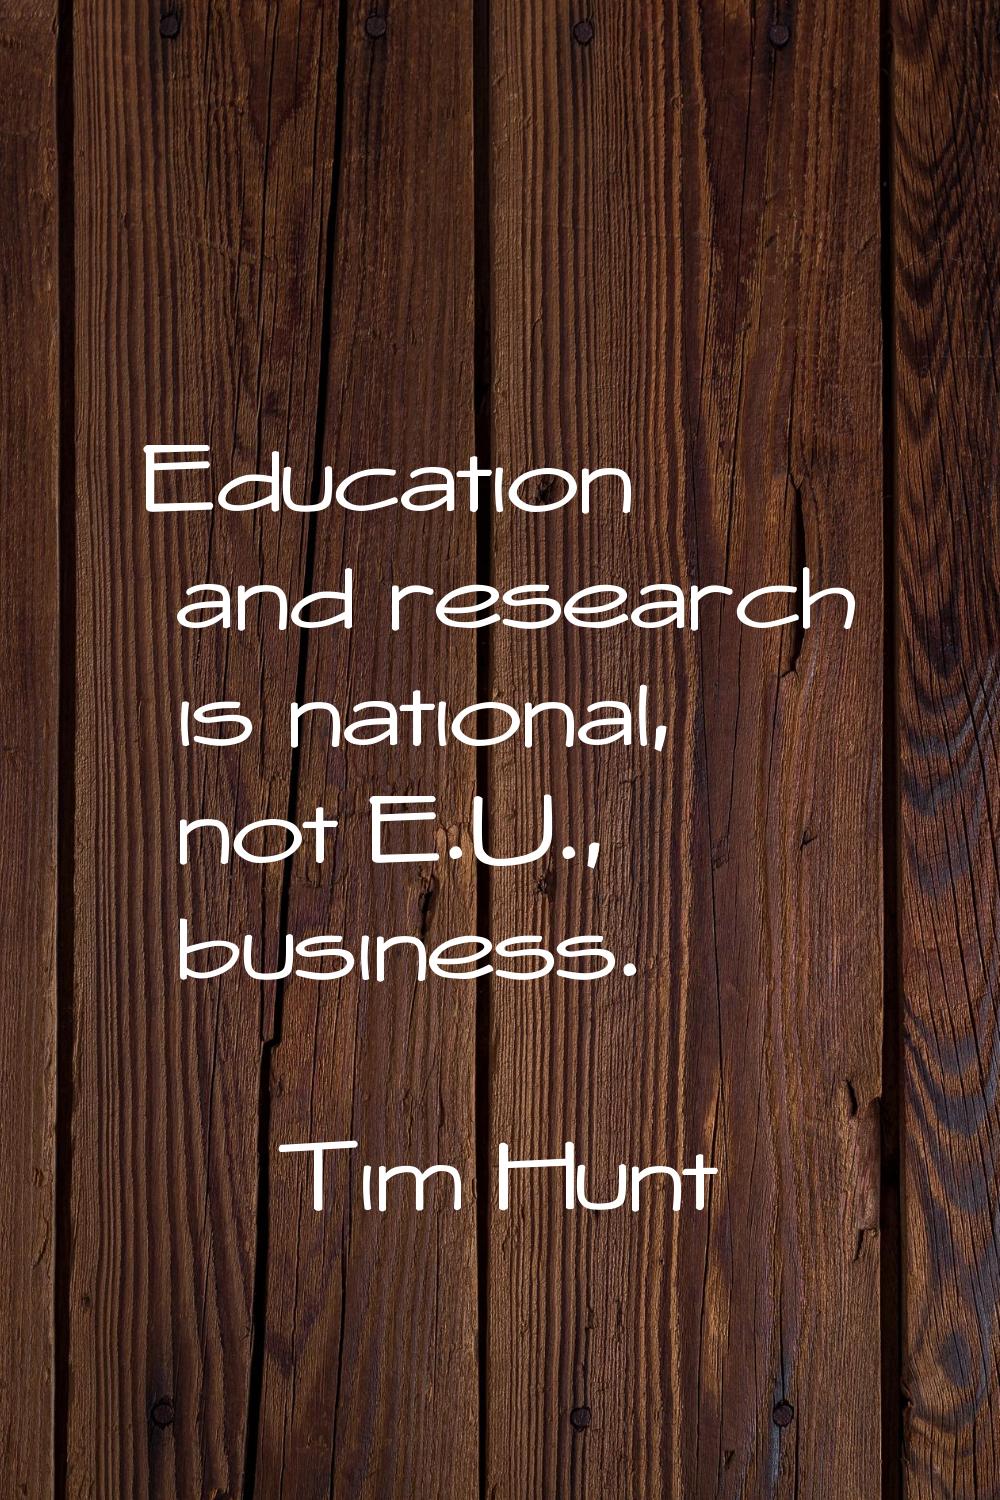 Education and research is national, not E.U., business.